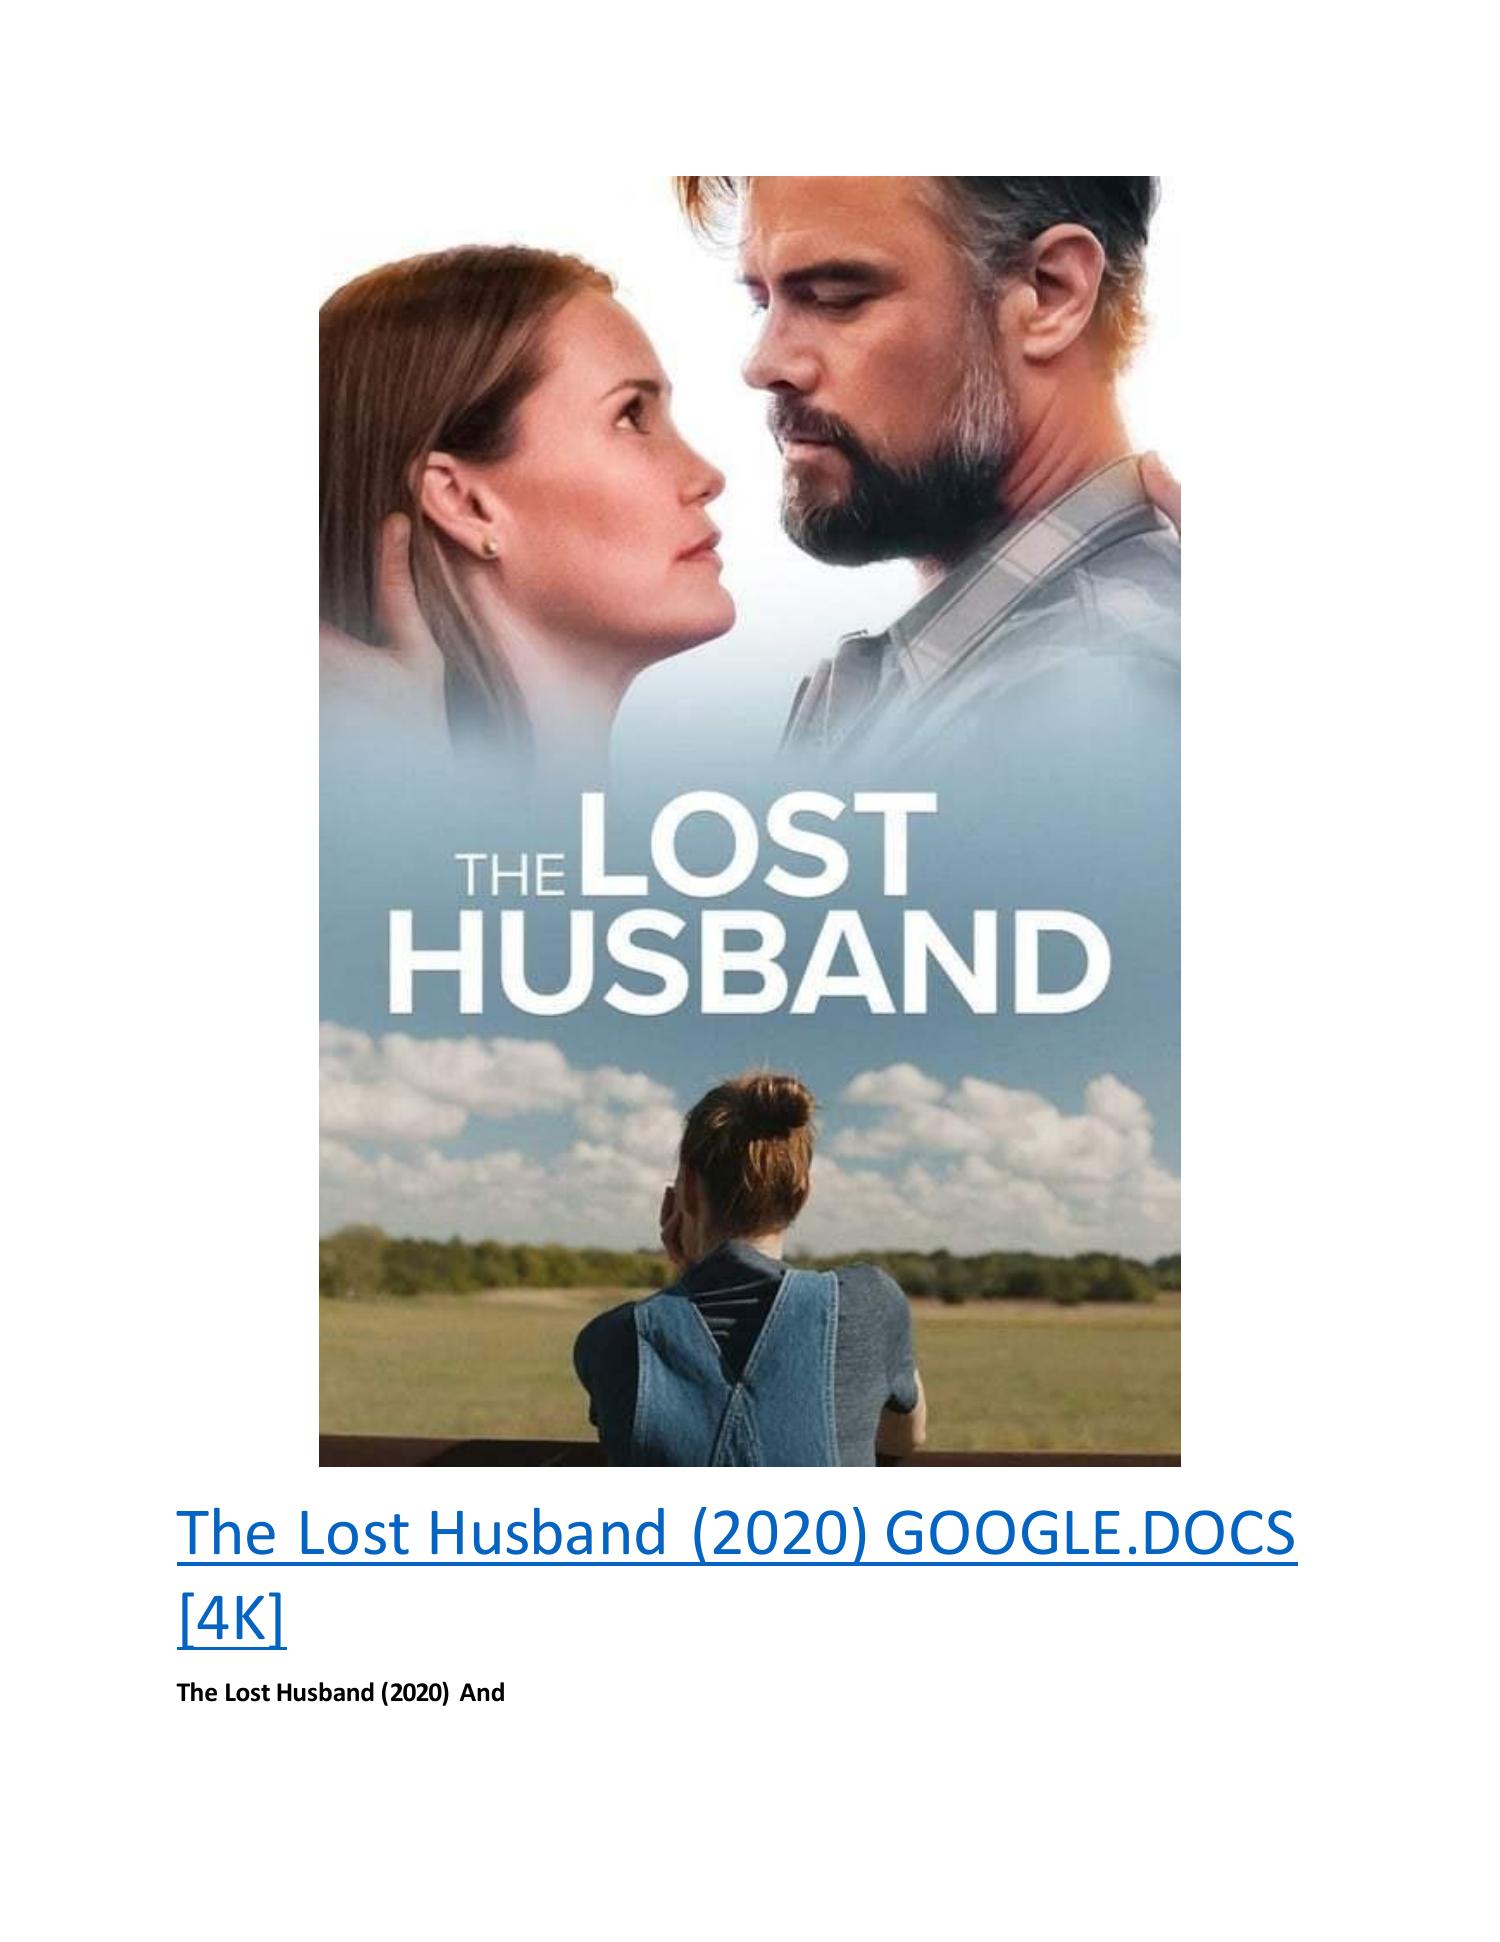 Prime Video: The Lost Husband